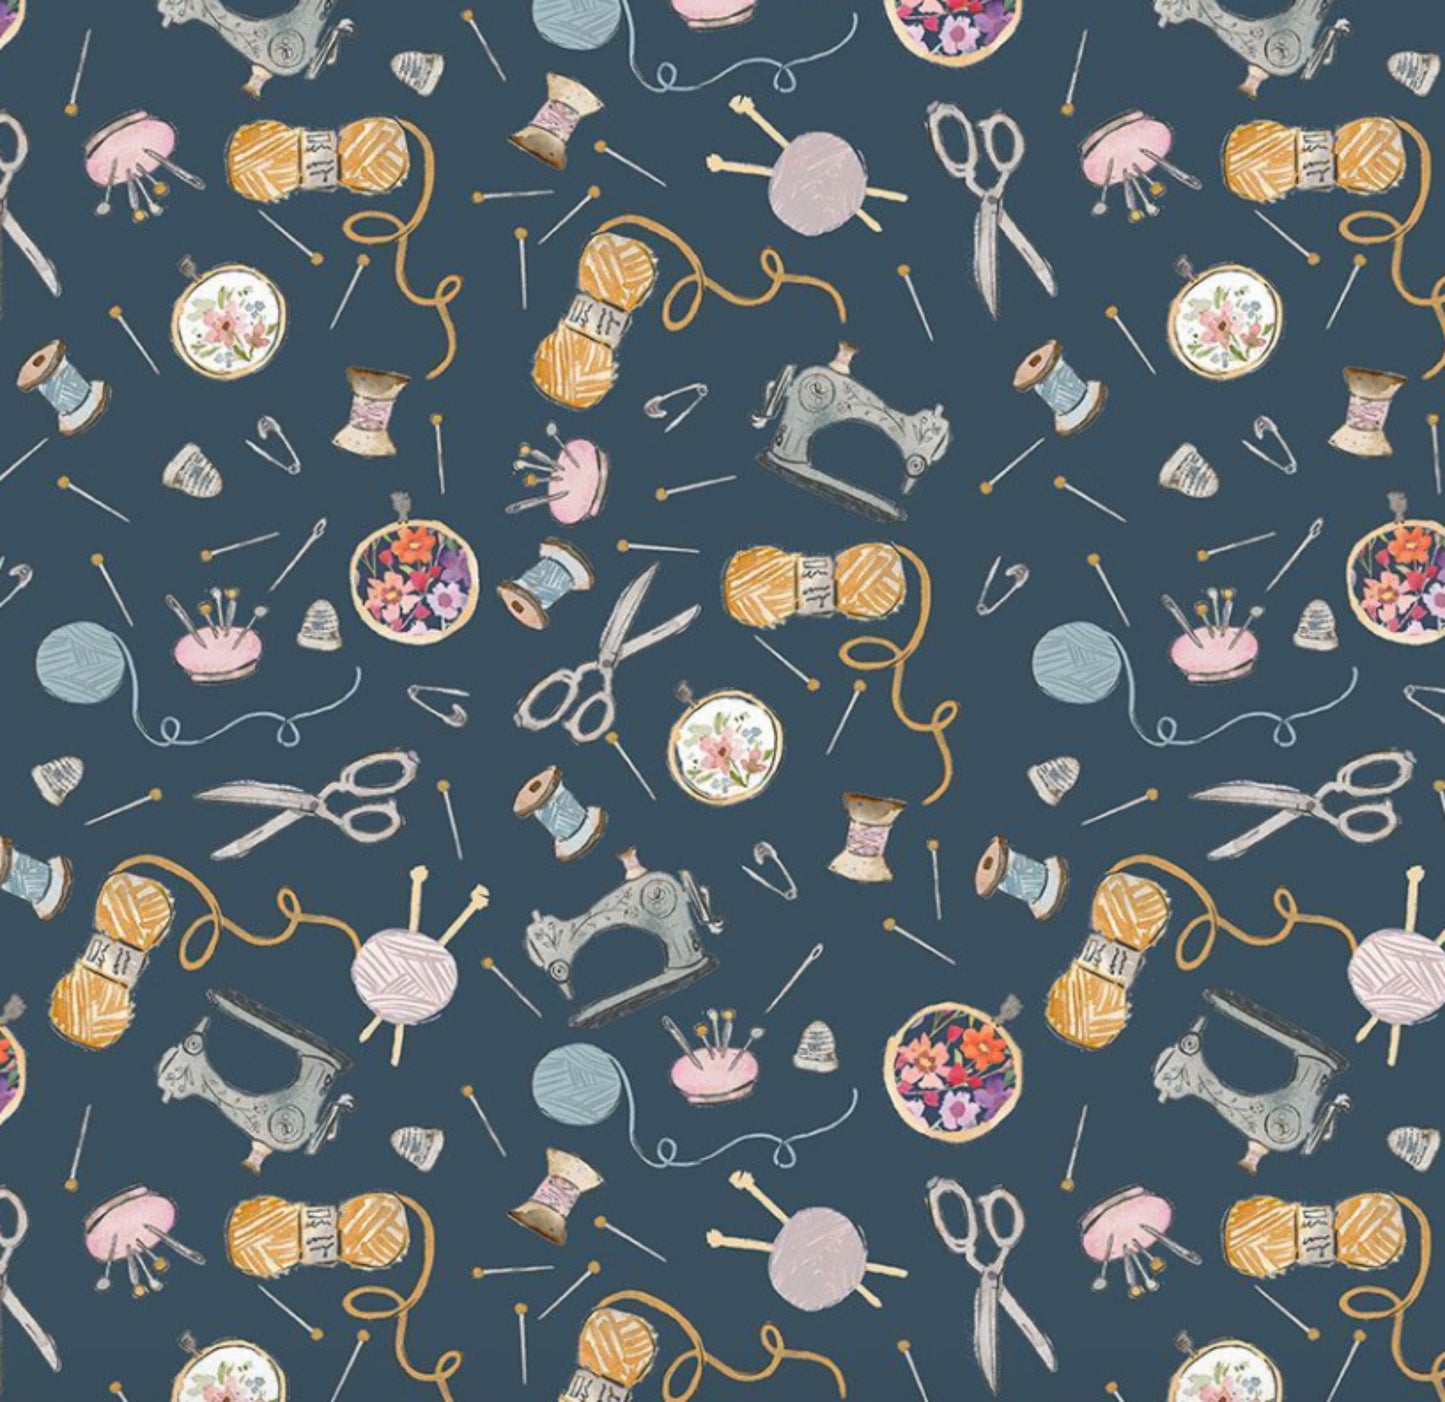 Sew What? Sewing Themed Fabric in Iron (Dark Gray) by Clara Jean for Dear Stella Fabrics